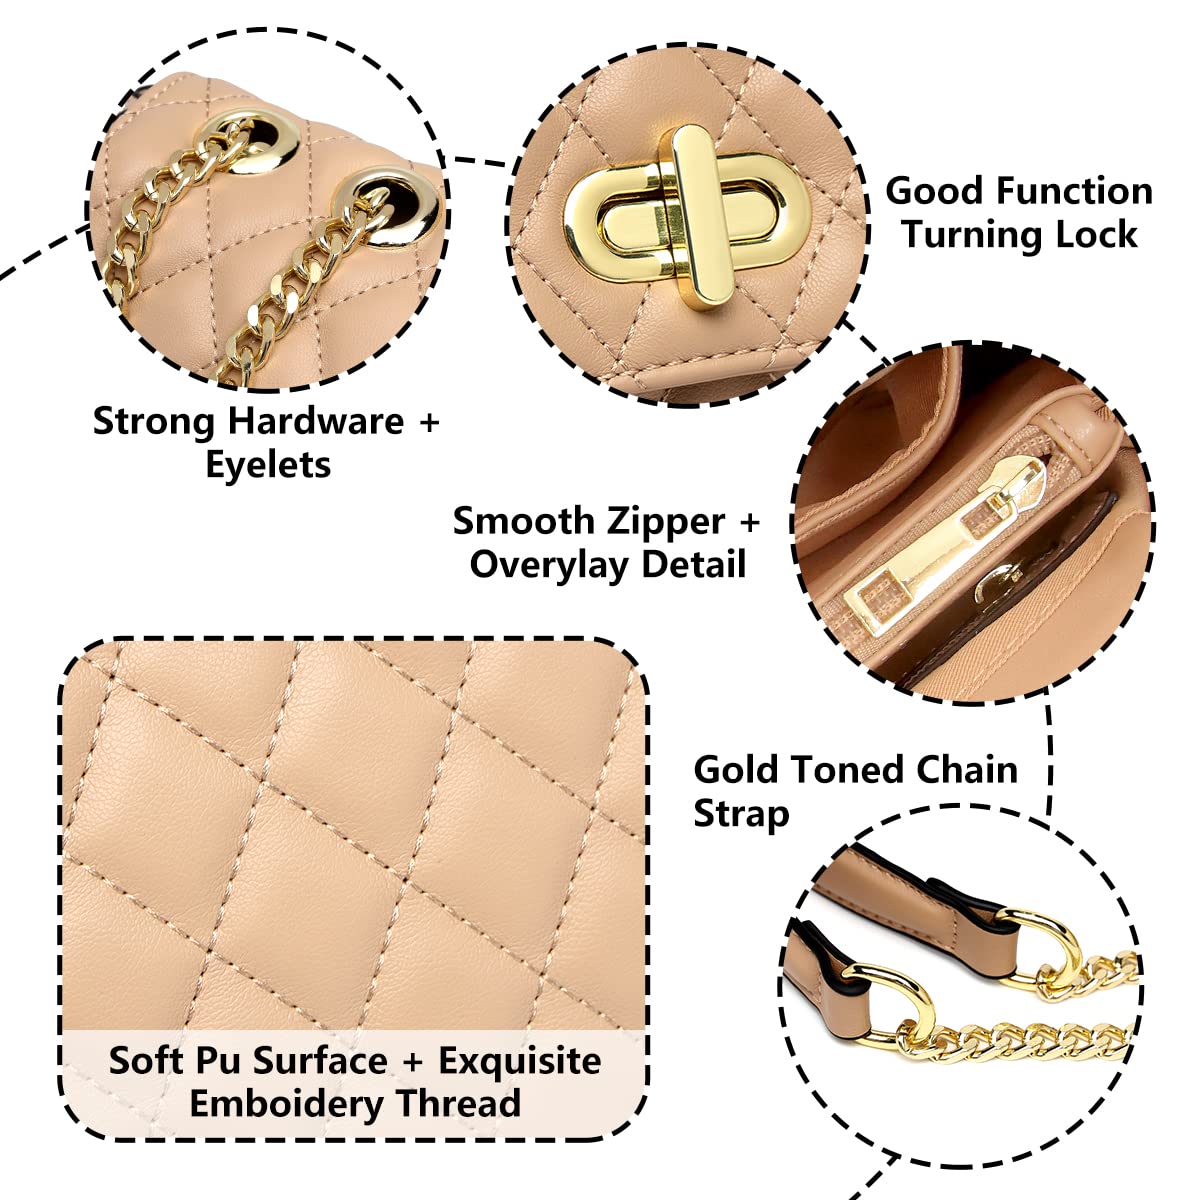 ER.Roulour Quilted Crossbody Bags for Women, Trendy Roomy Shoulder Handbags with Flap Gold Hardware Chain Purses Shoulder Bag